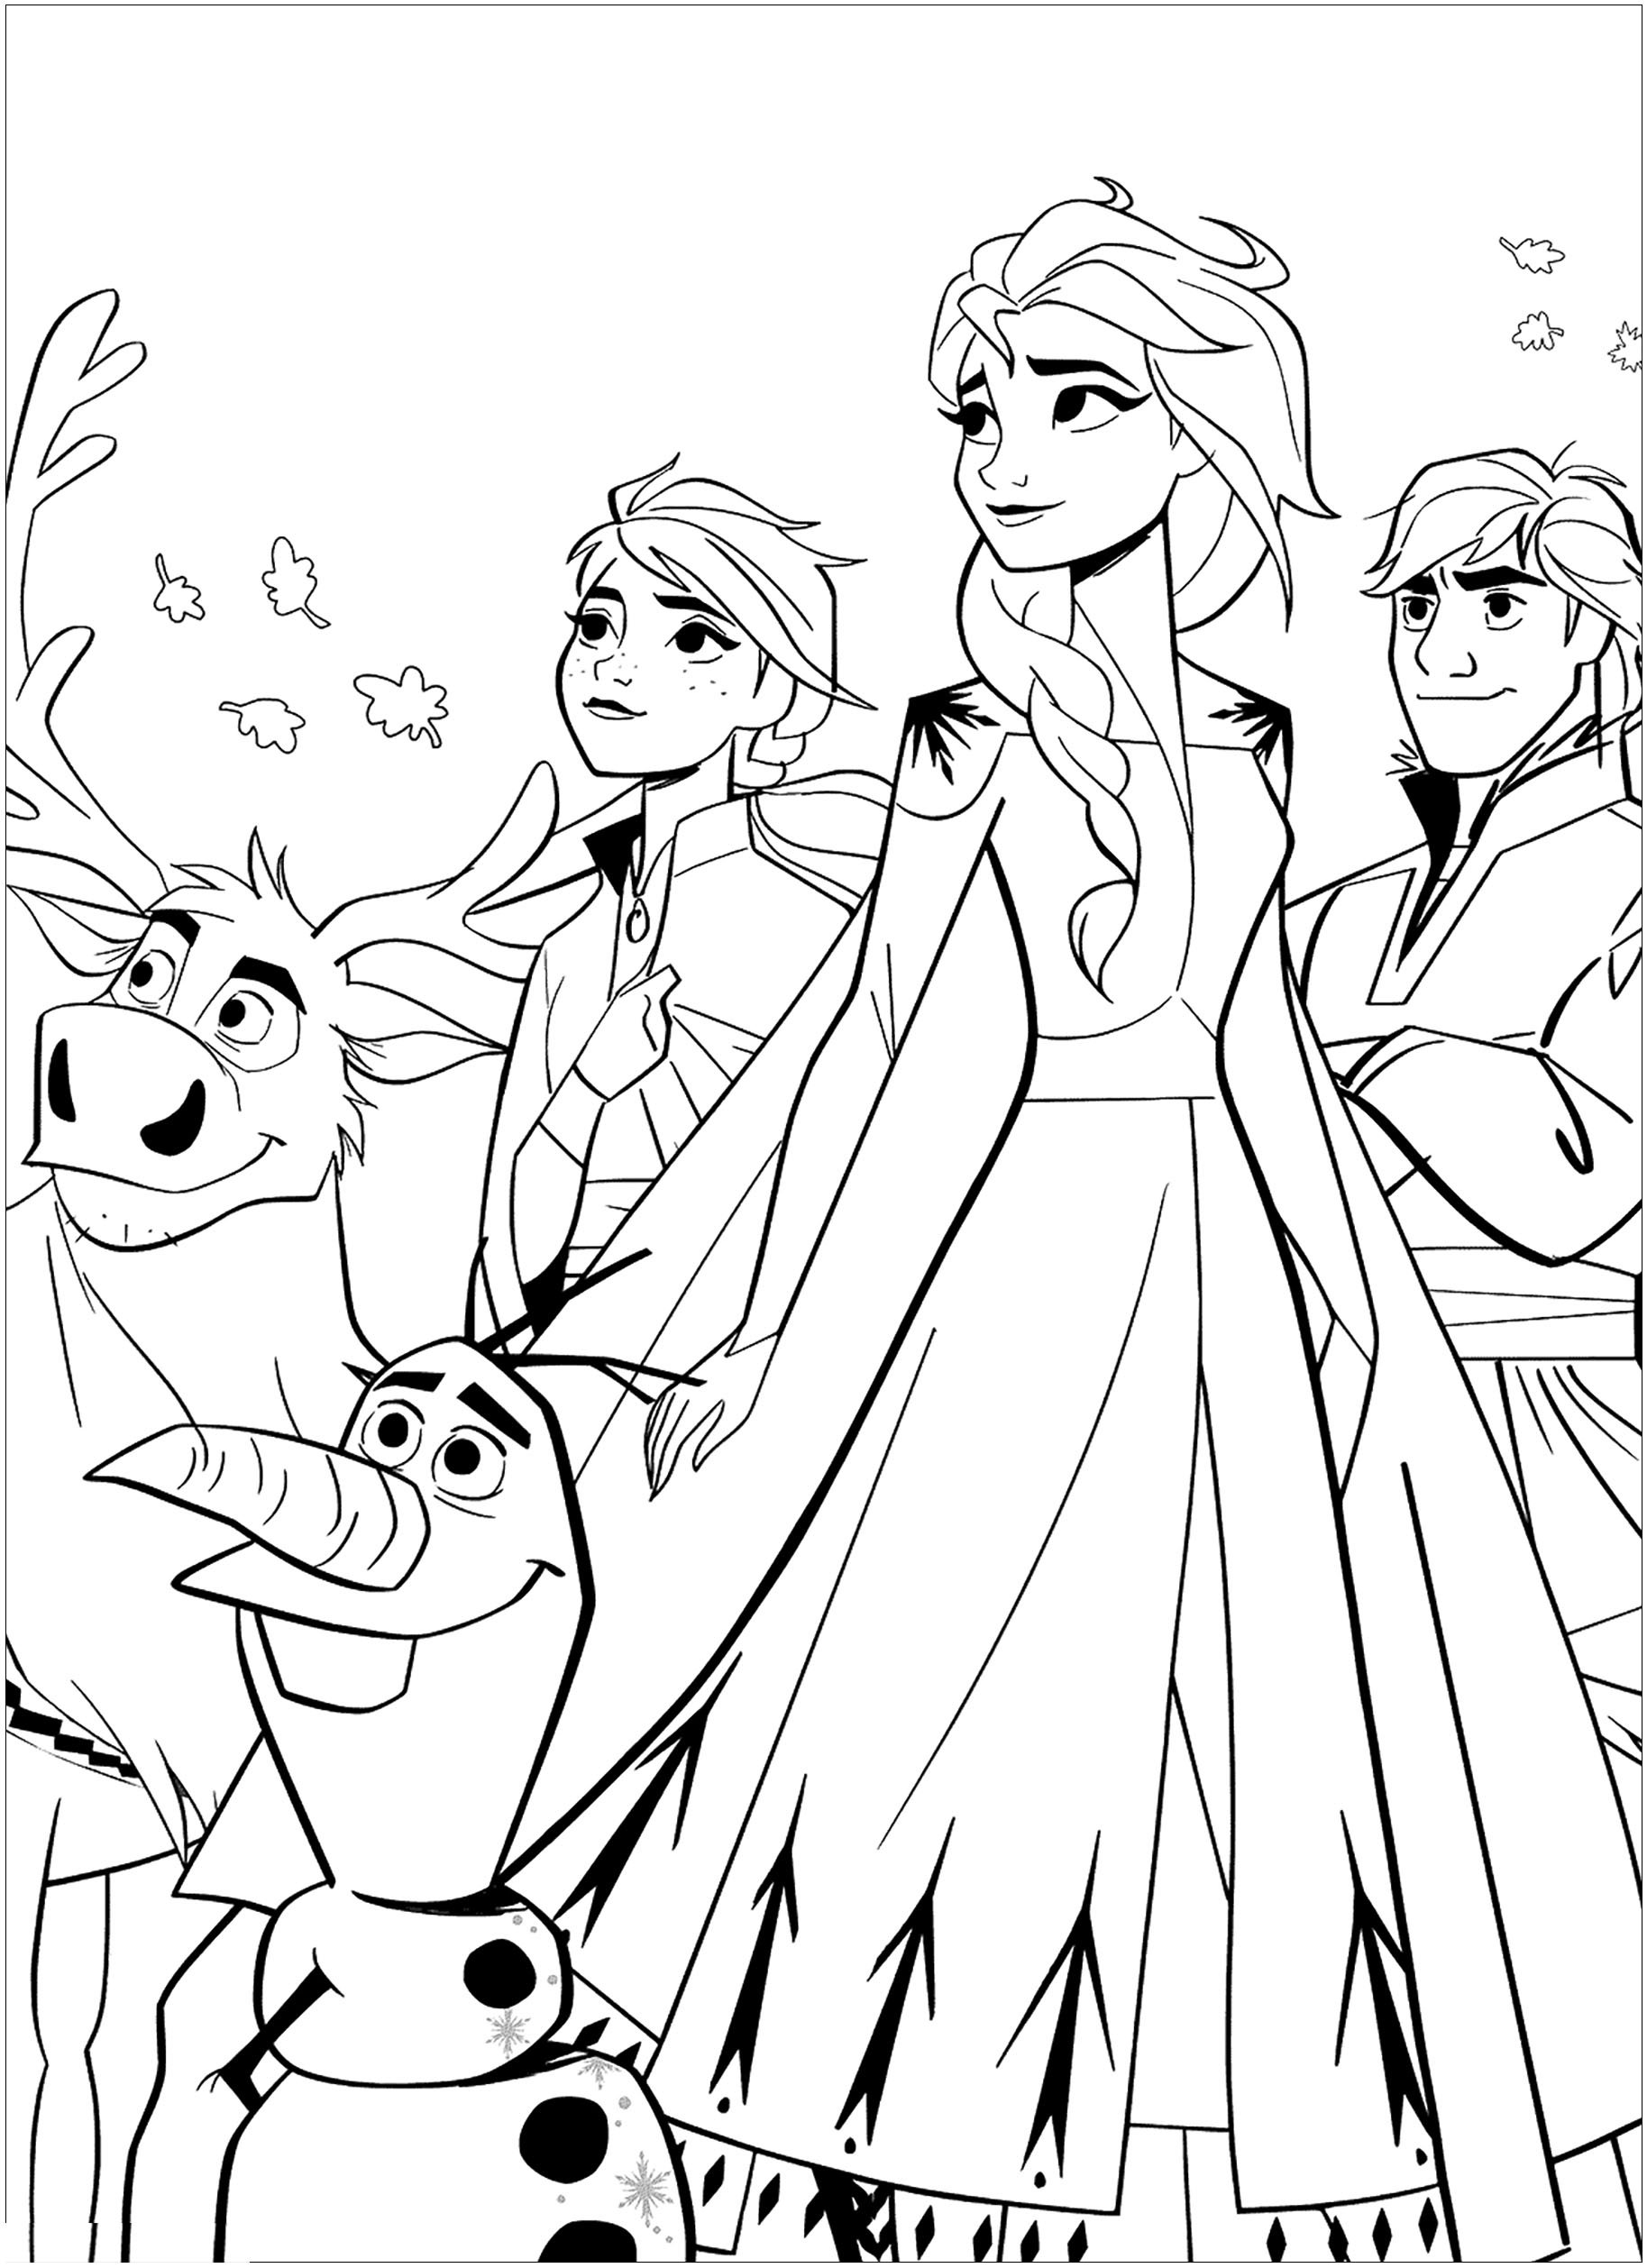 Coloring Pages Elsa Drawings for sketching - SheetalColor.com